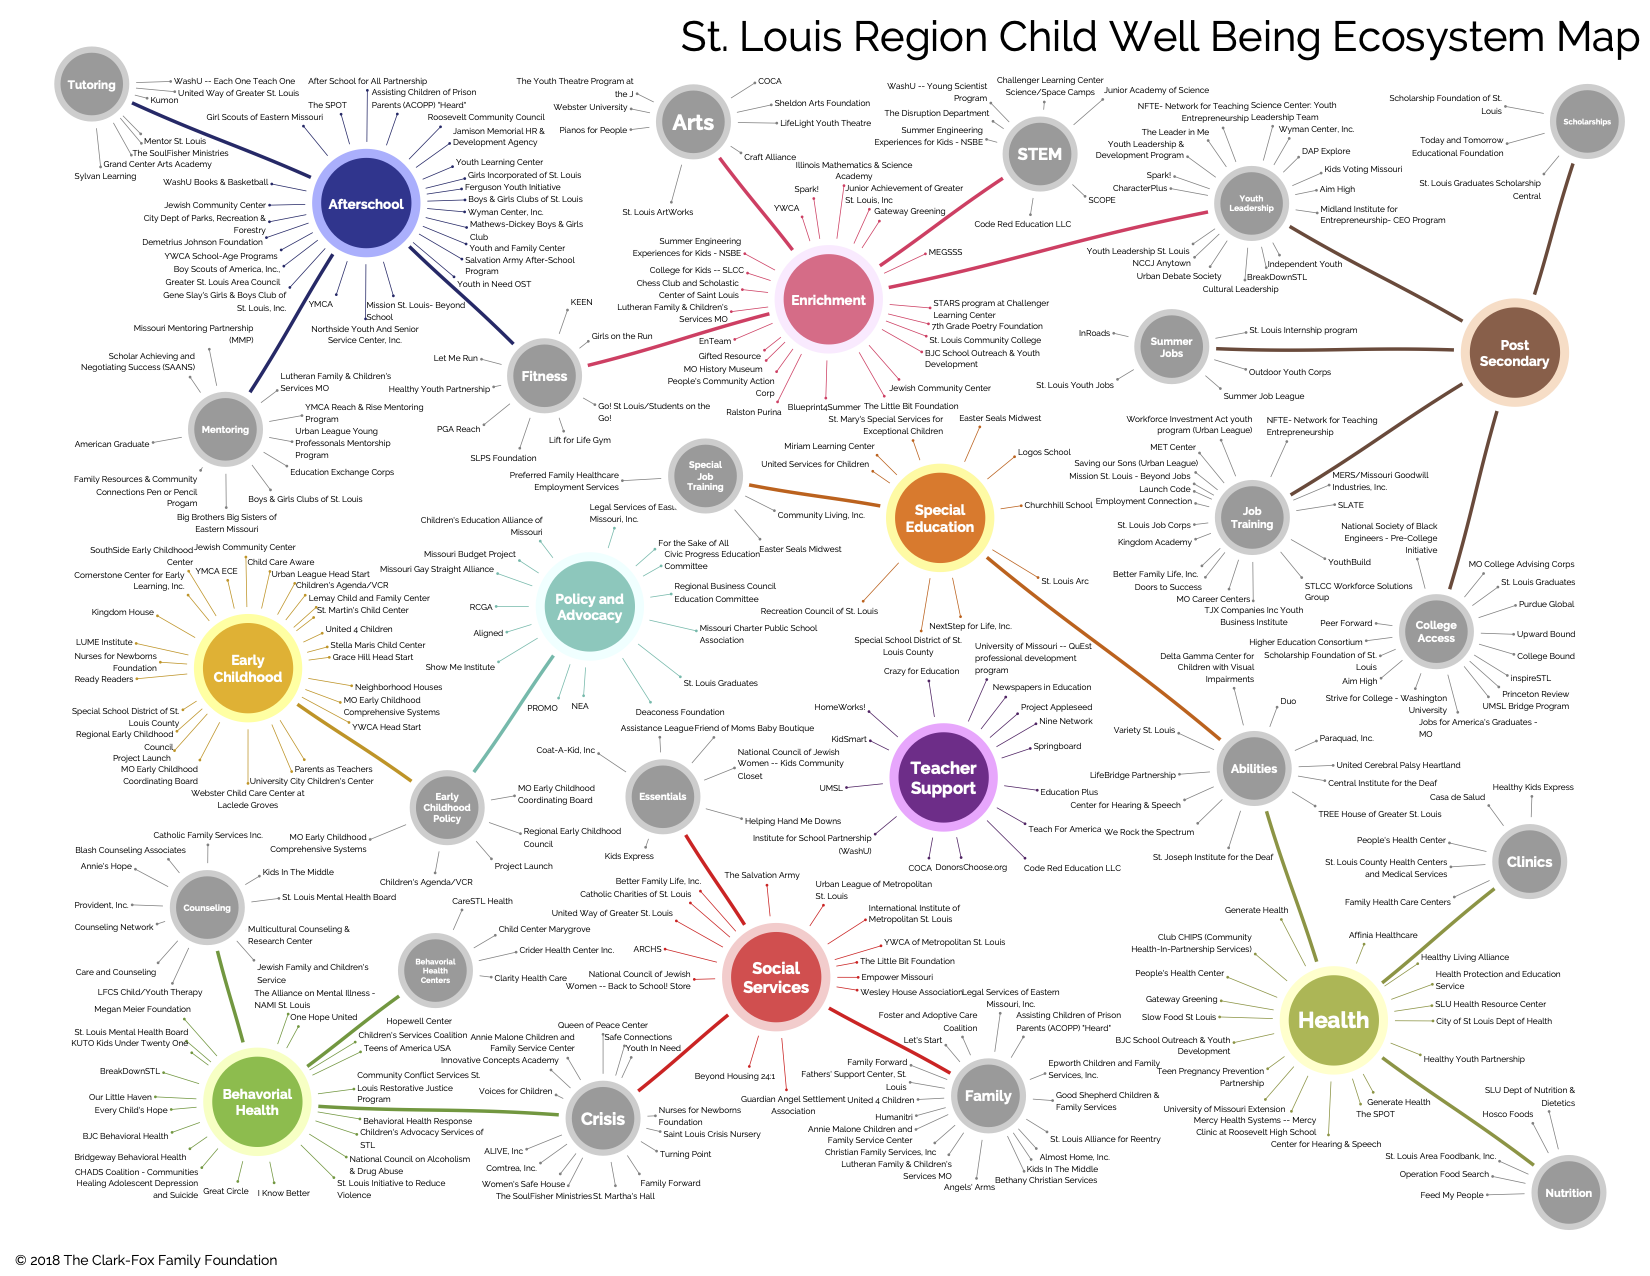 Clark-Fox Foundation interactive resource page on Child Well Being.